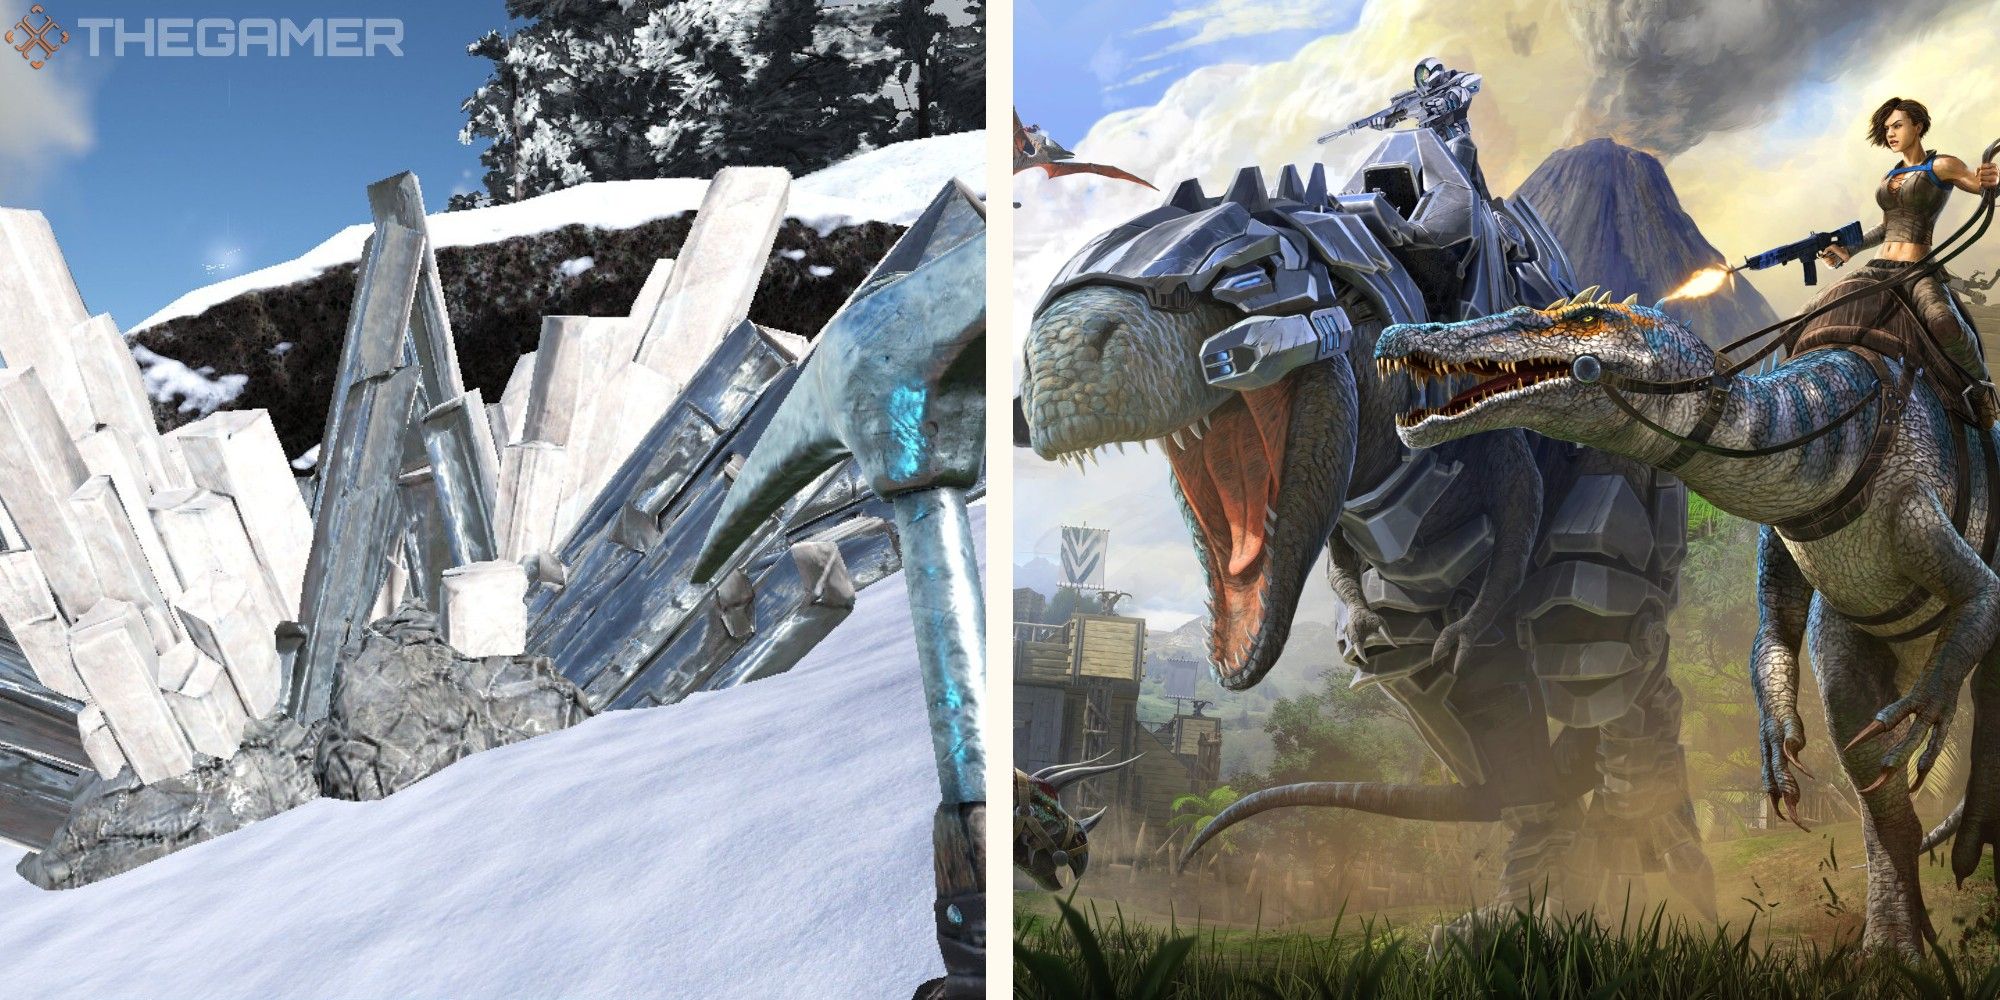 image of crystal next to image of promotional art for the game